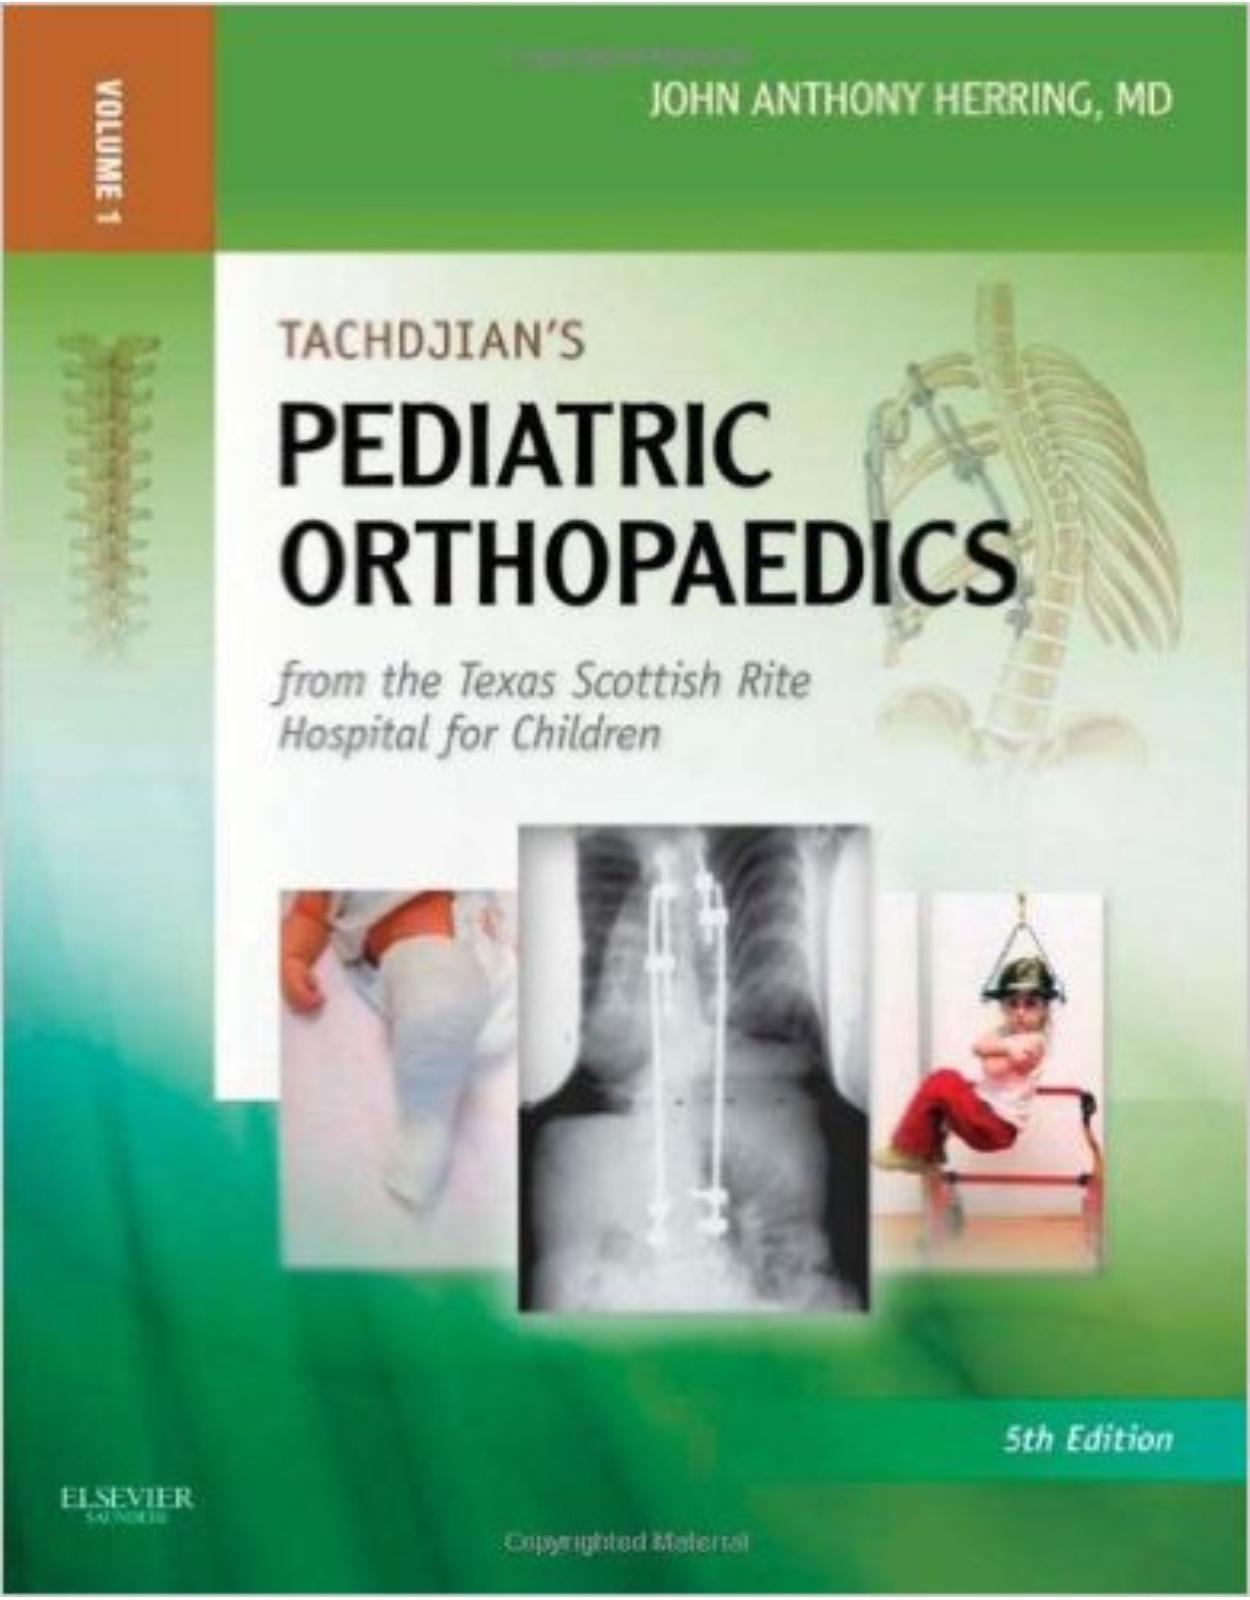 Tachdjian’s Pediatric Orthopaedics: From the Texas Scottish Rite Hospital for Children: Expert Consult: Online and Print, 3- Volume Set (2 Volumes in ... Online Only), 5e (Pediatric Orthopedics)